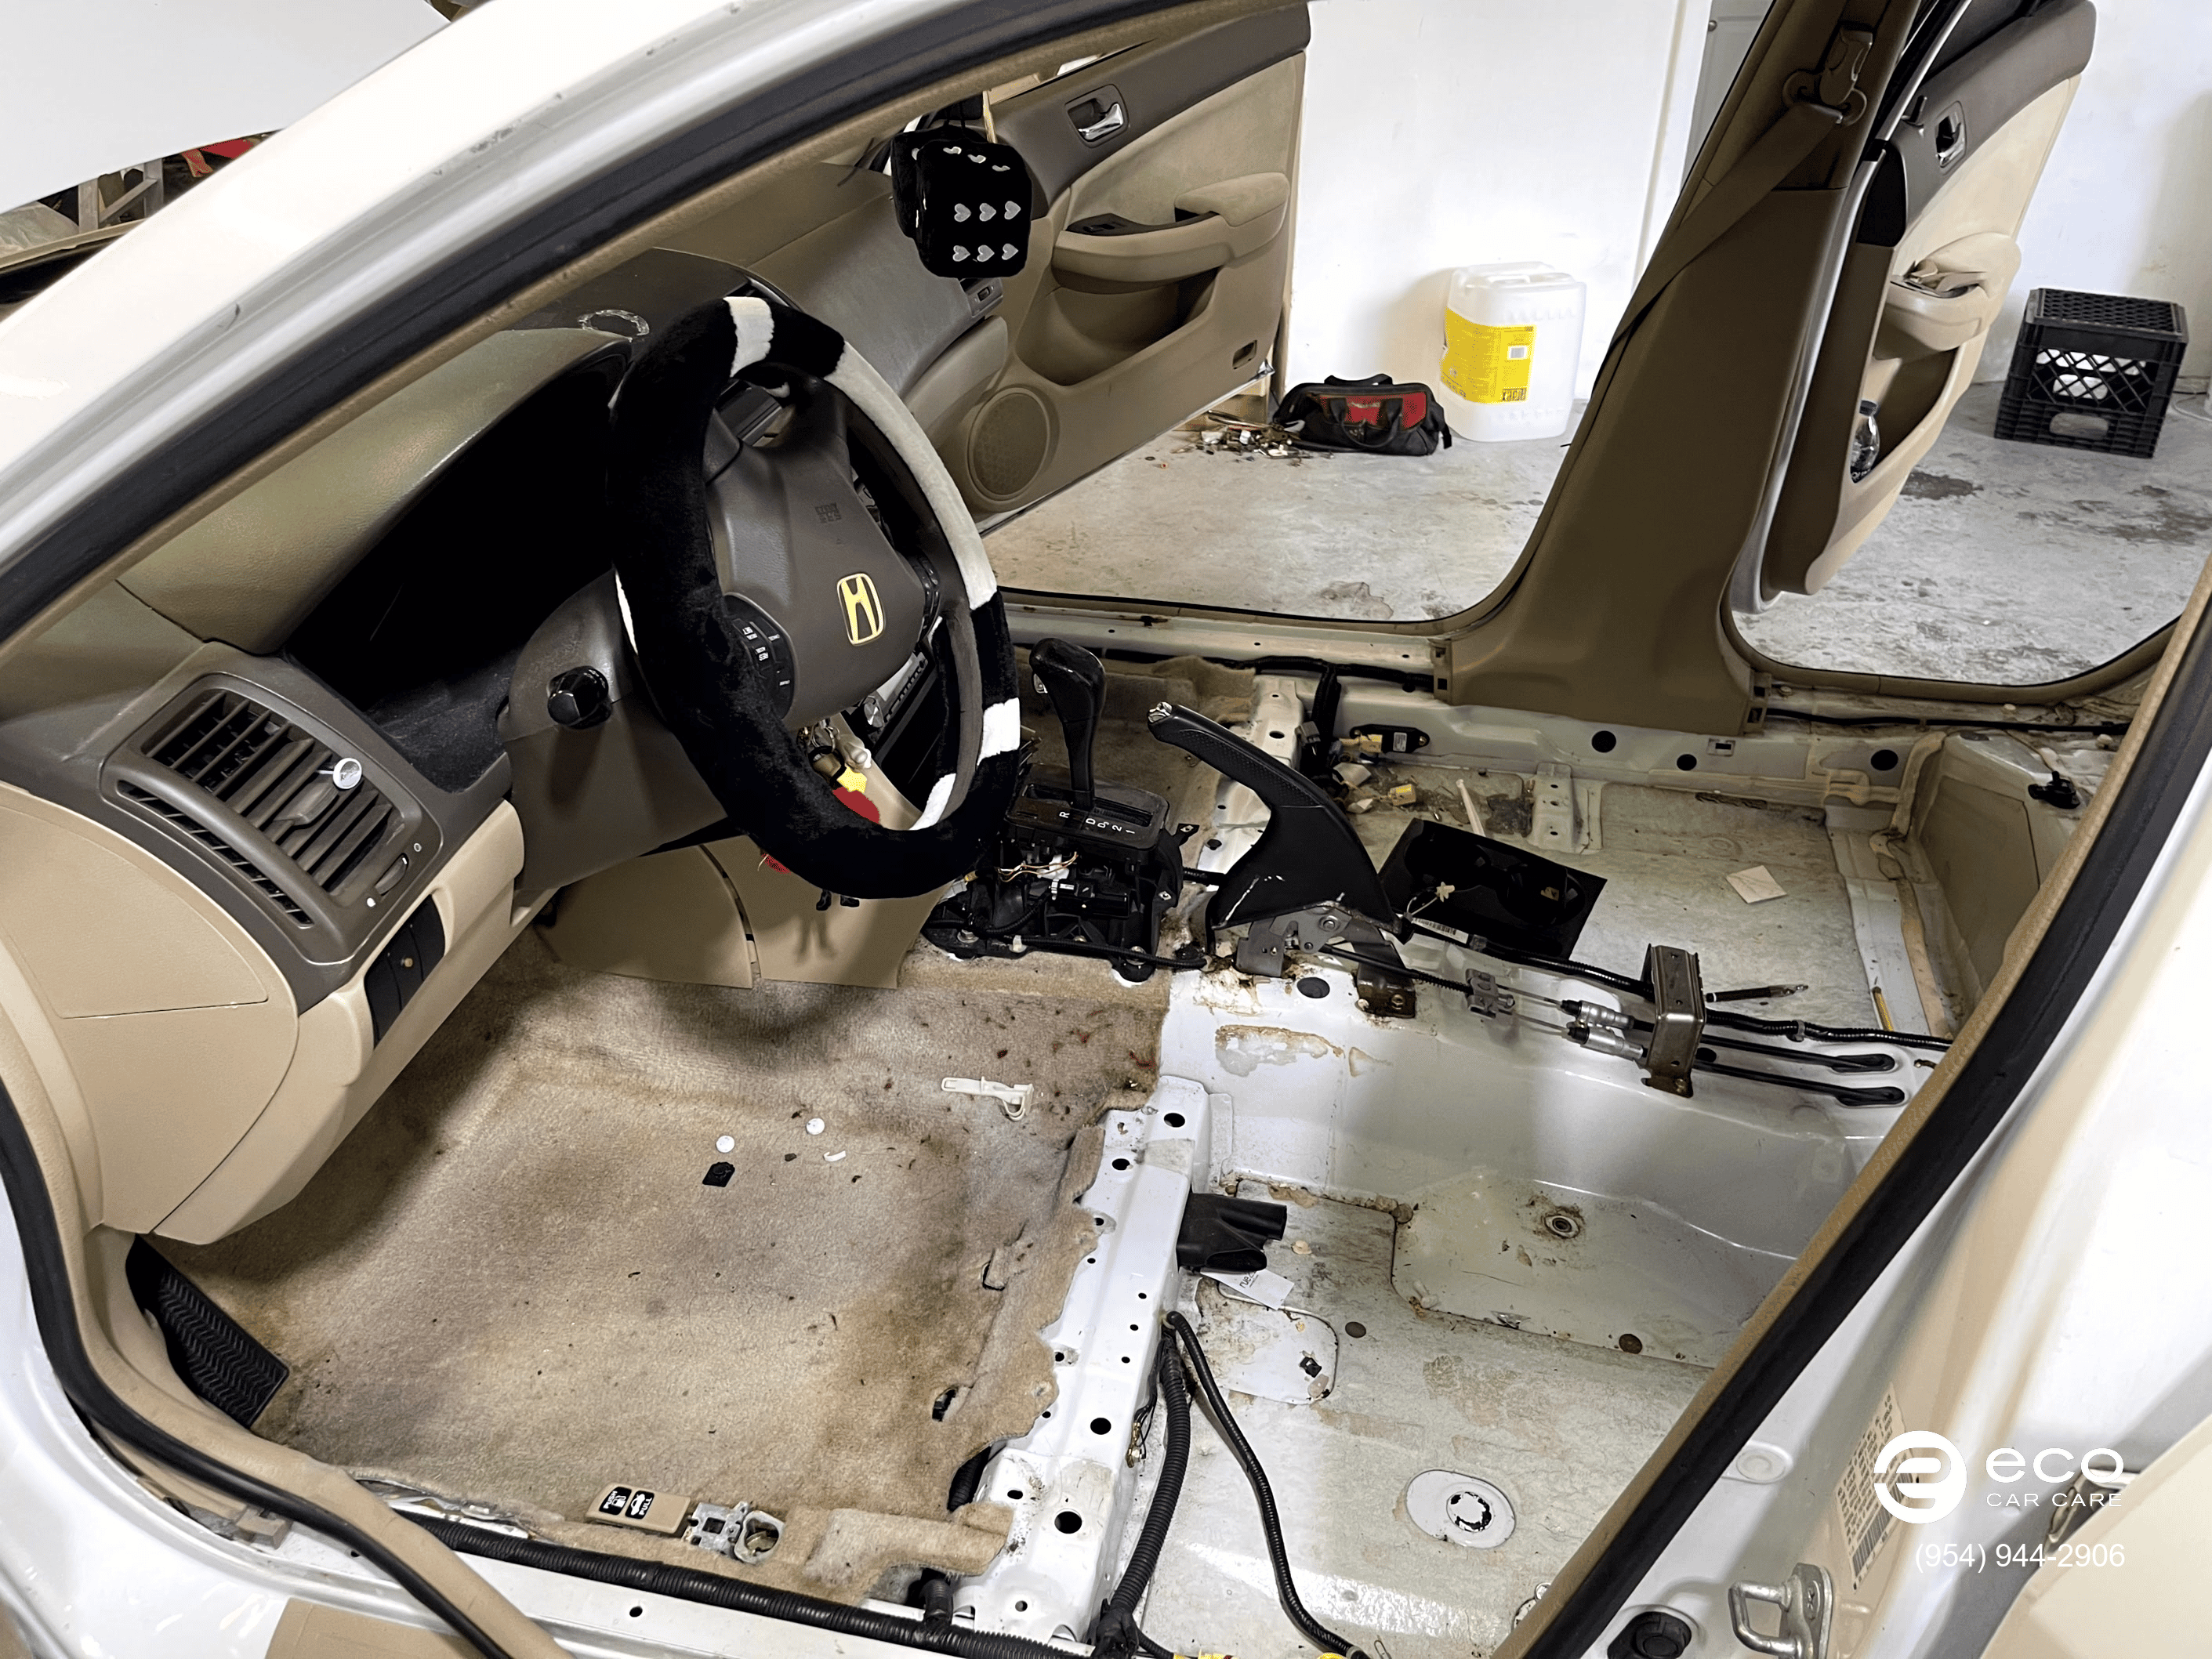 car mold removal